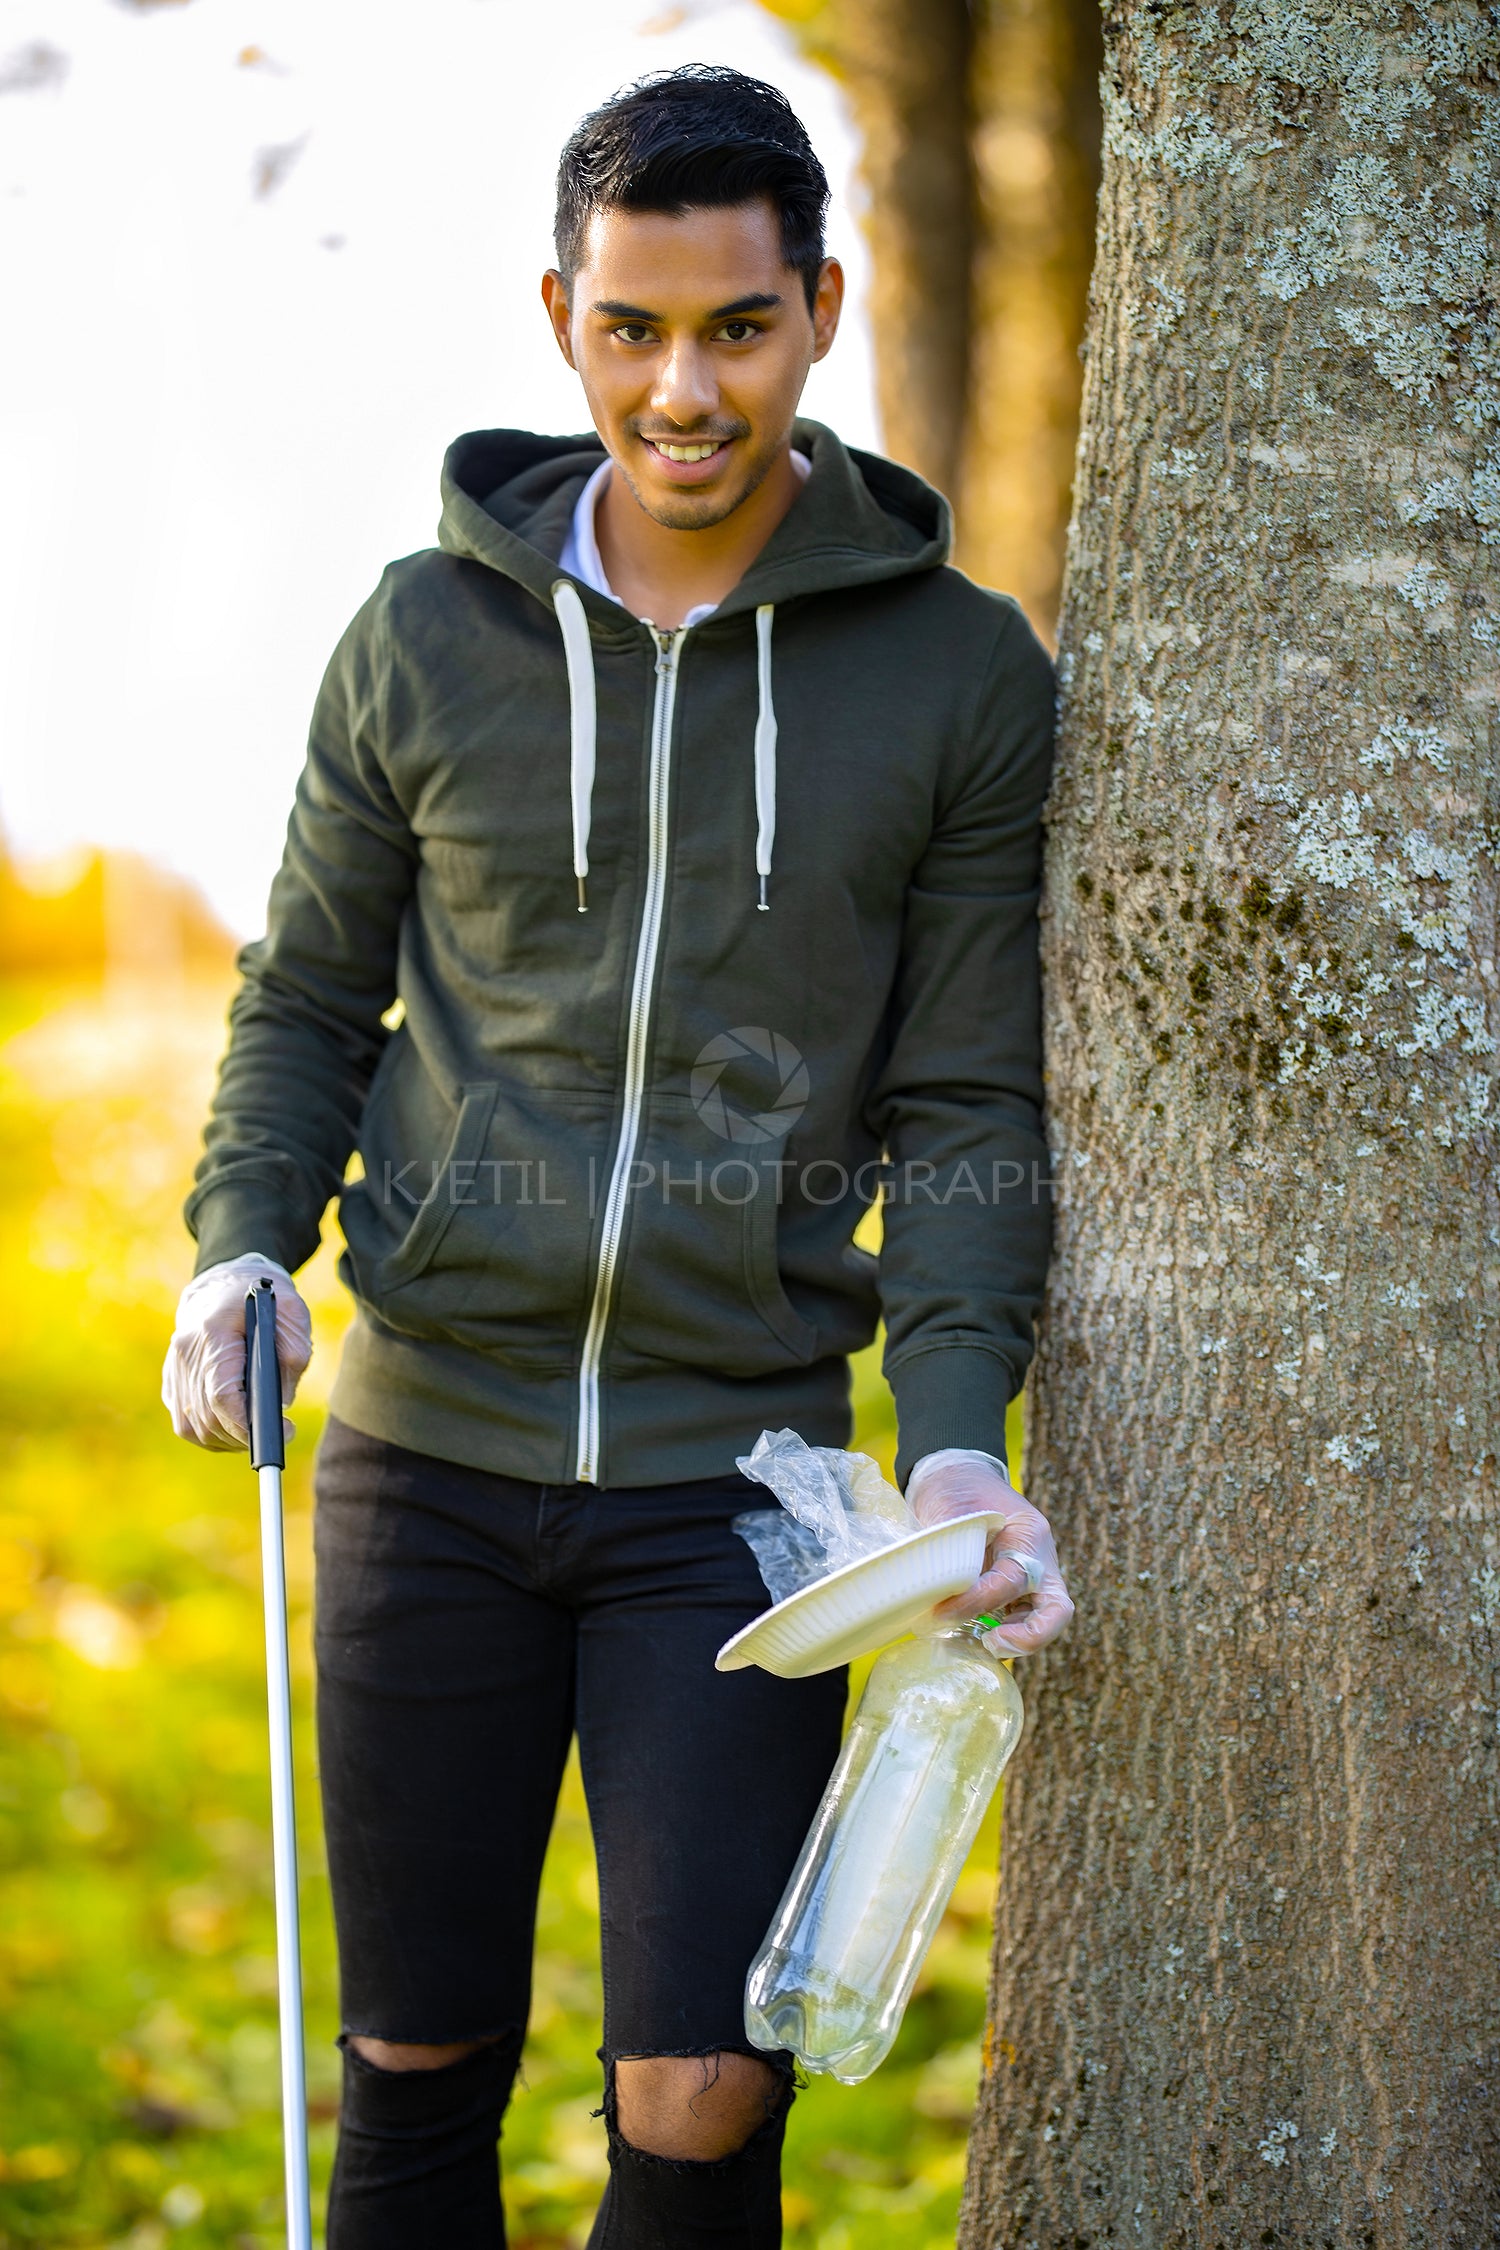 Smiling environmental protection volunteer holding garbage and mechanical grabber